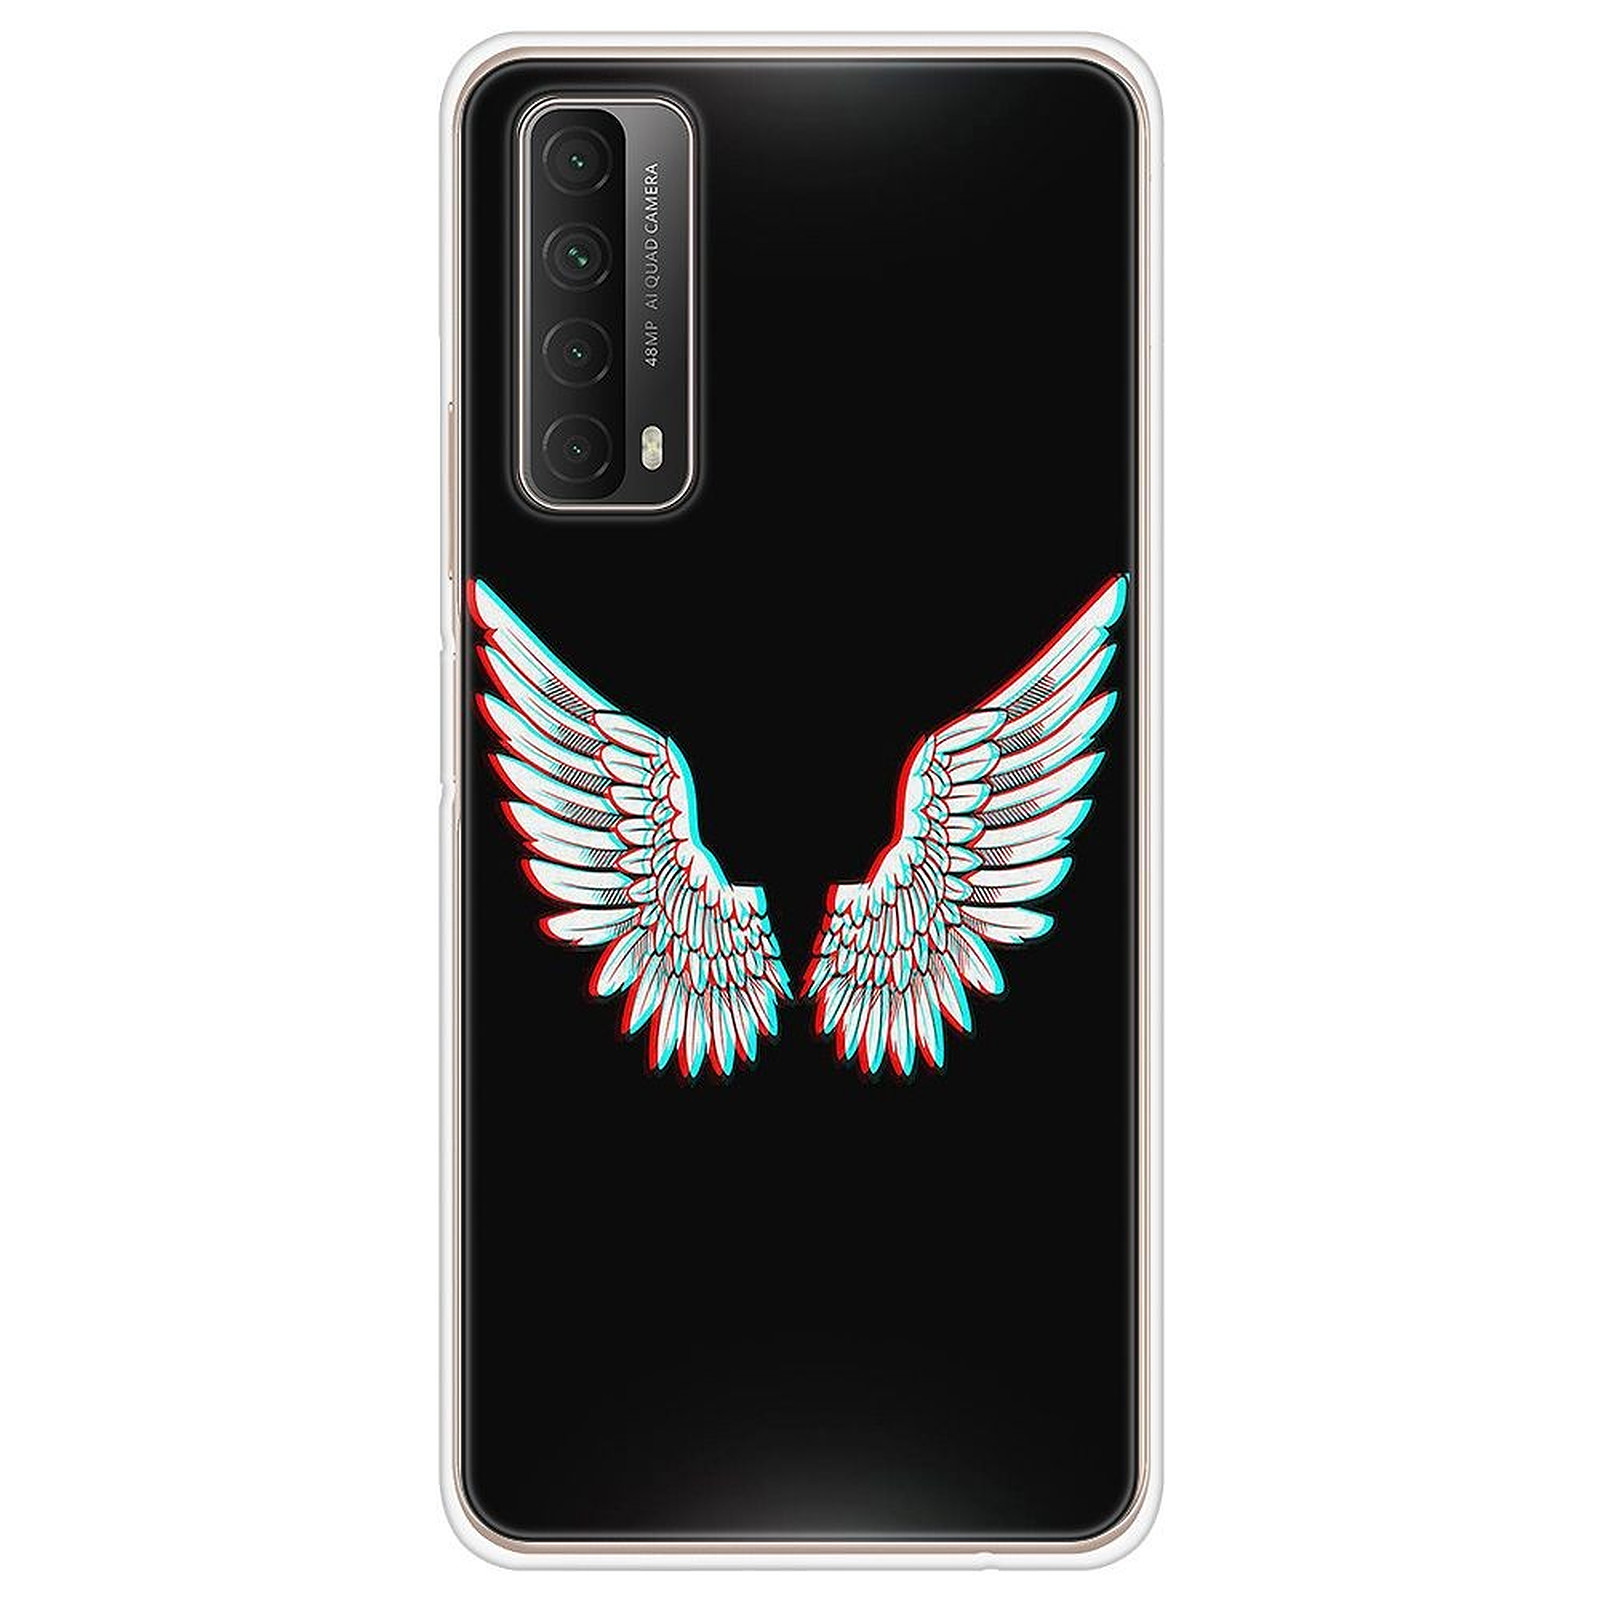 1001 Coques Coque silicone gel Huawei P Smart 2021 motif Ailes d'Ange - Coque telephone 1001Coques